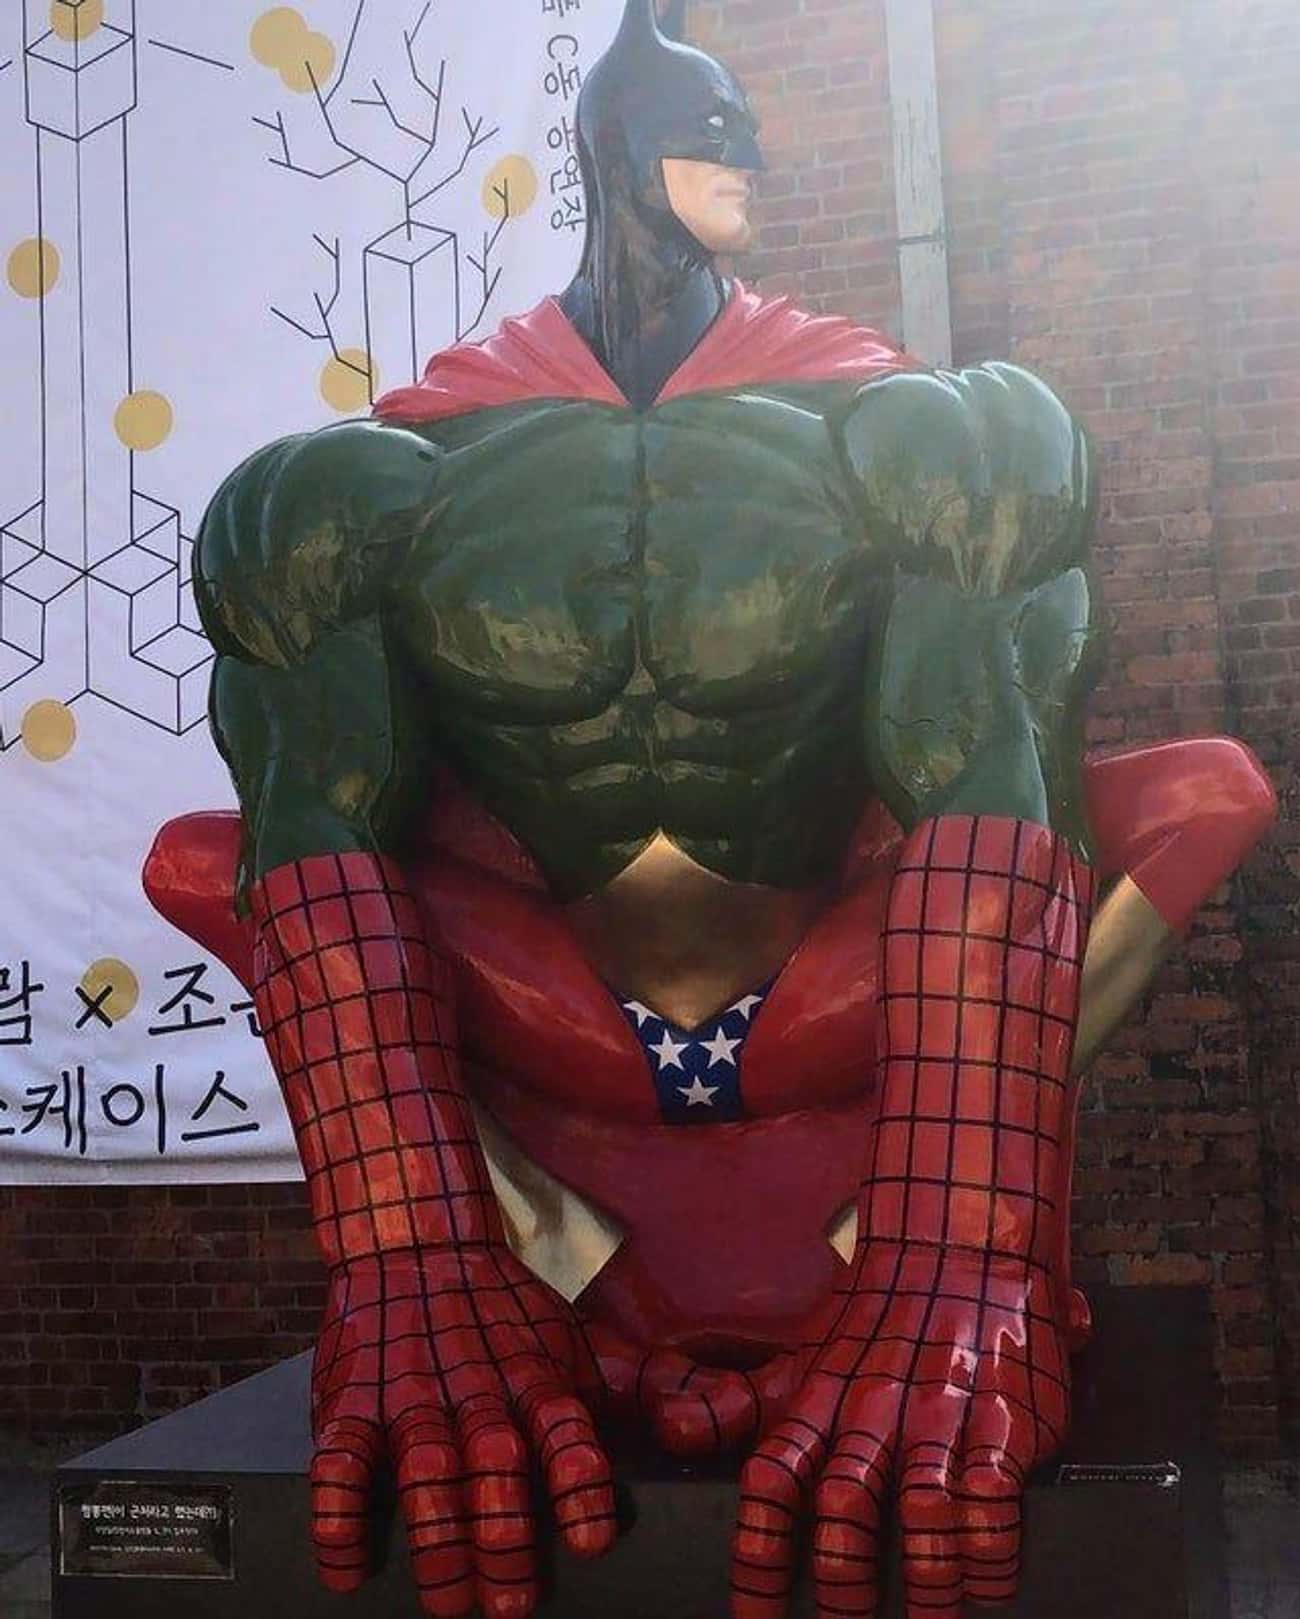 Who Needs Individual Superheroes When You Have Super Captain SpiderHulk?